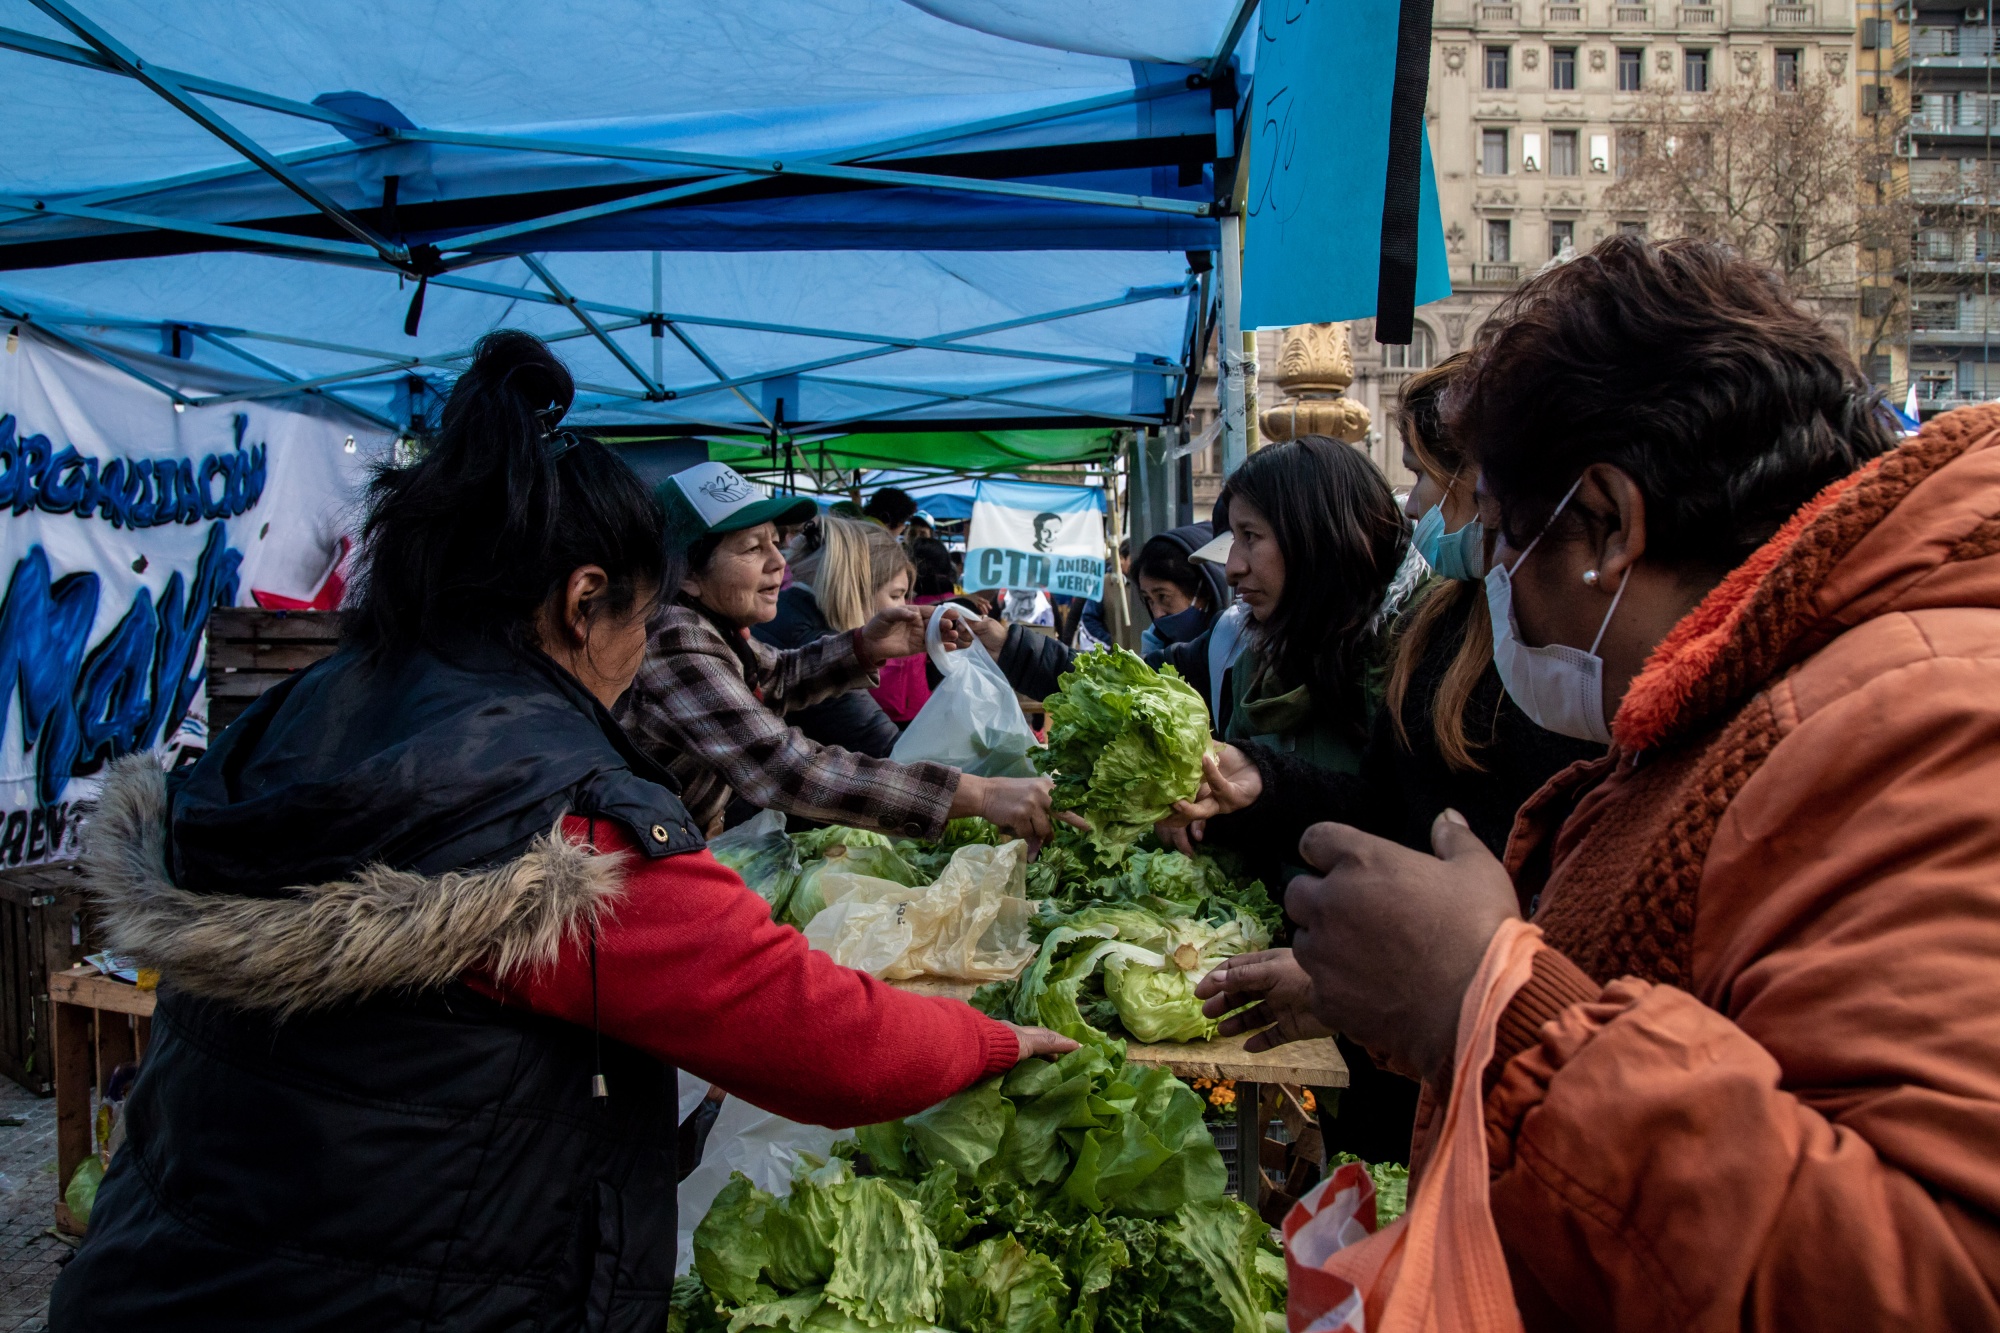 Shoppers purchase groceries at a market hosted by the Union of Popular Economic Workers to help those in need,&nbsp;in front of the National Congress building in Buenos Aires&nbsp;on&nbsp;July 14.